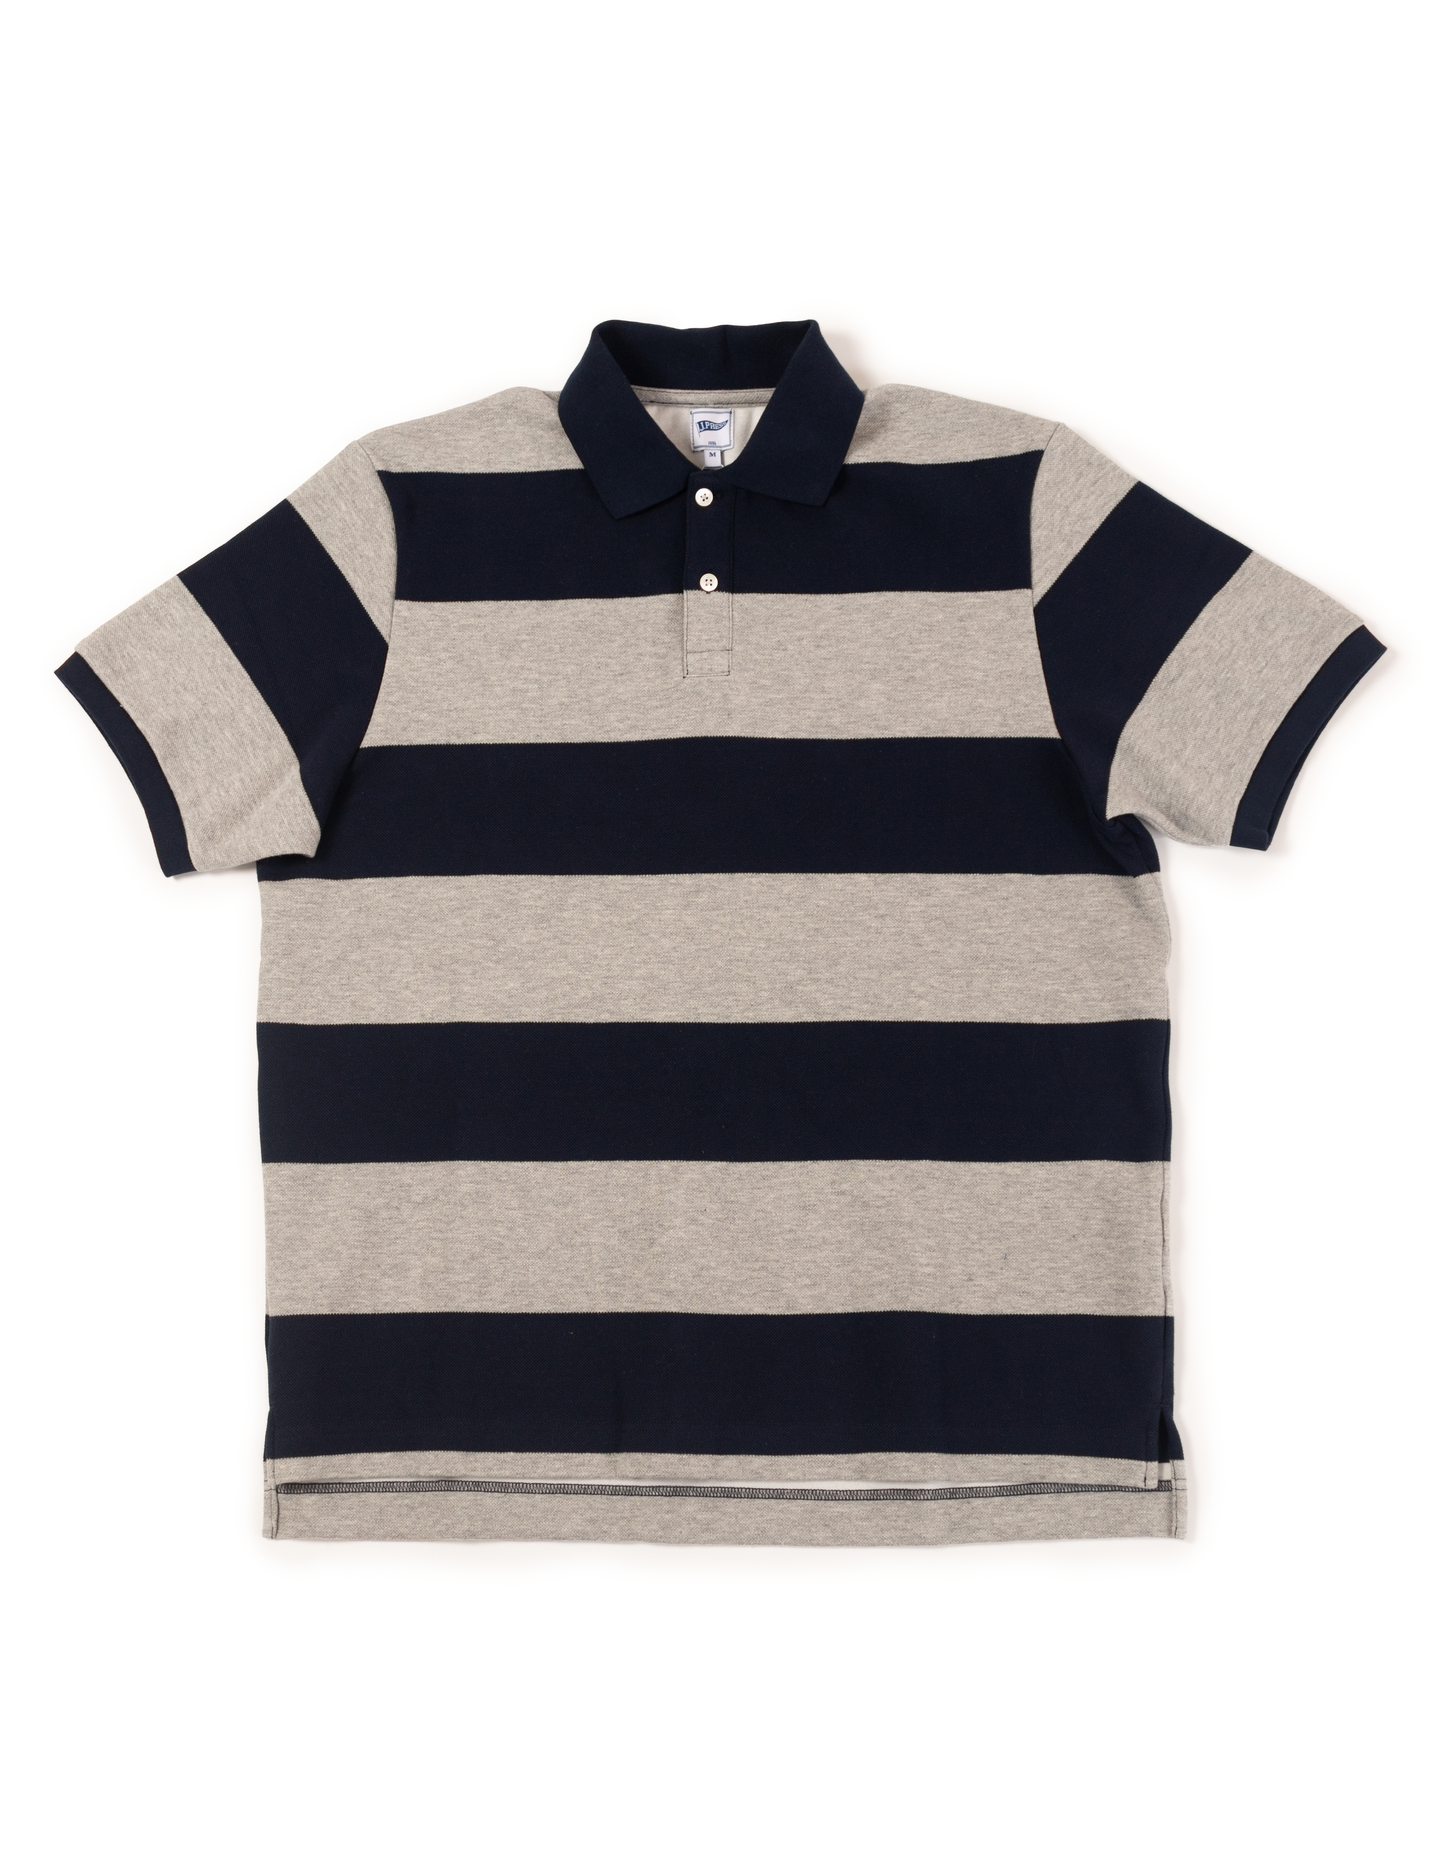 RELAXED FIT WIDE STRIPE POLO - NAVY/GREY